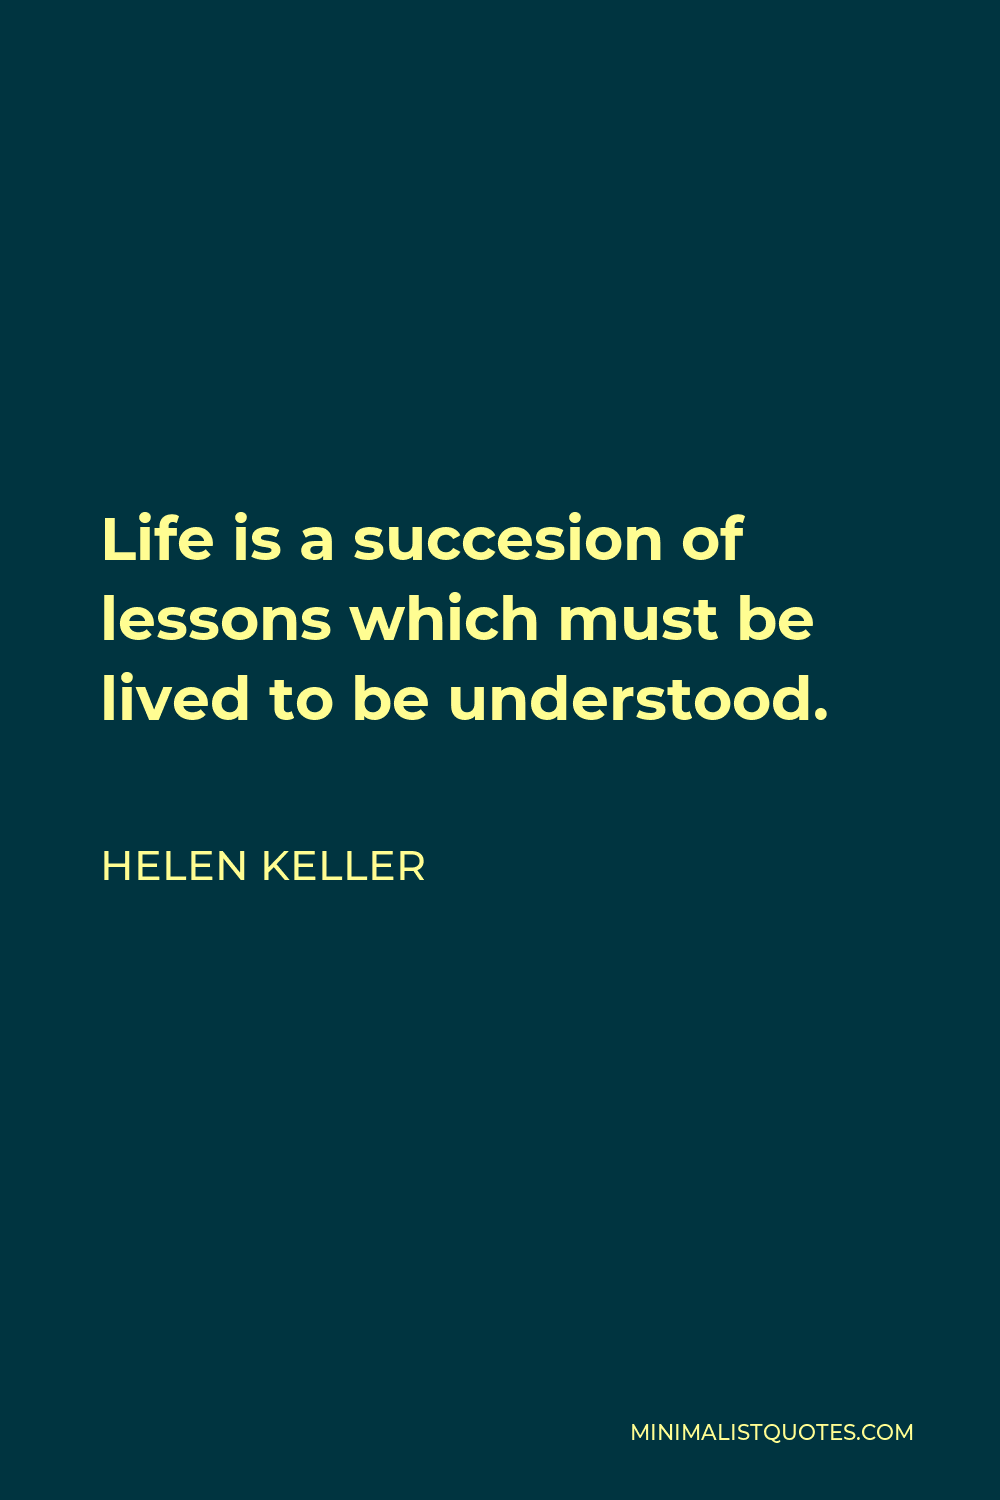 Helen Keller Quote - Life is a succesion of lessons which must be lived to be understood.